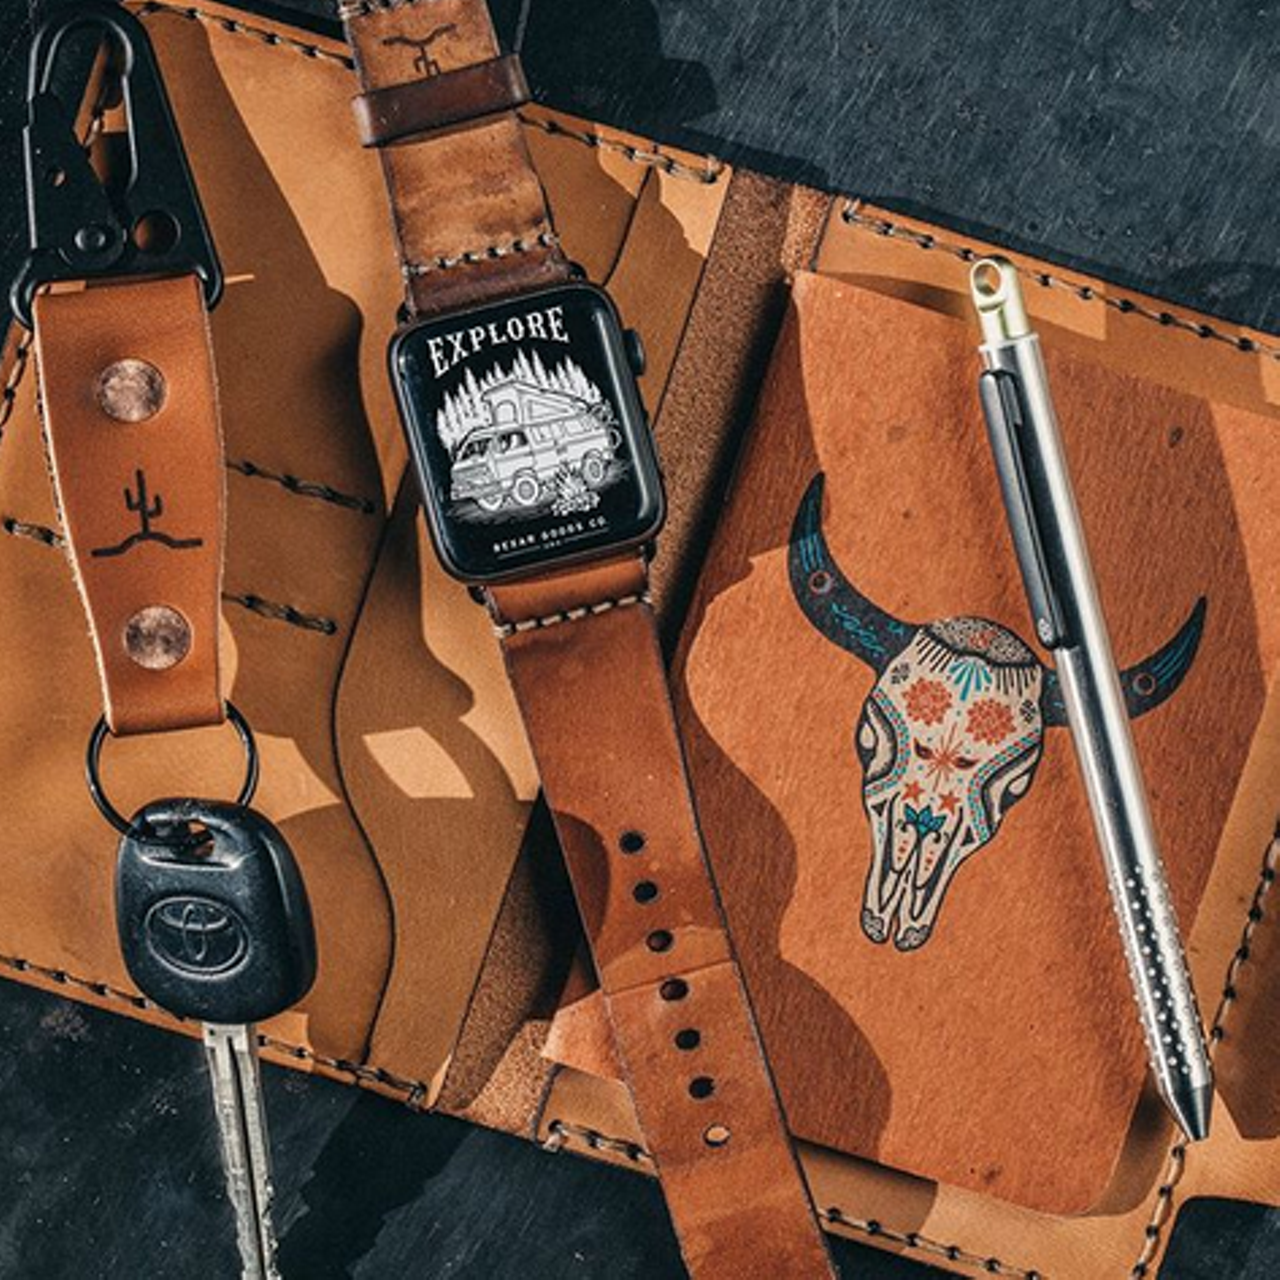 Bexar Goods
Supporting craftsmen that design rugged, simplistic and durable items comes Bexar Goods Co. who are now offering same-day and next-day shipping to your home.
Photo via Instagram / bexargoods